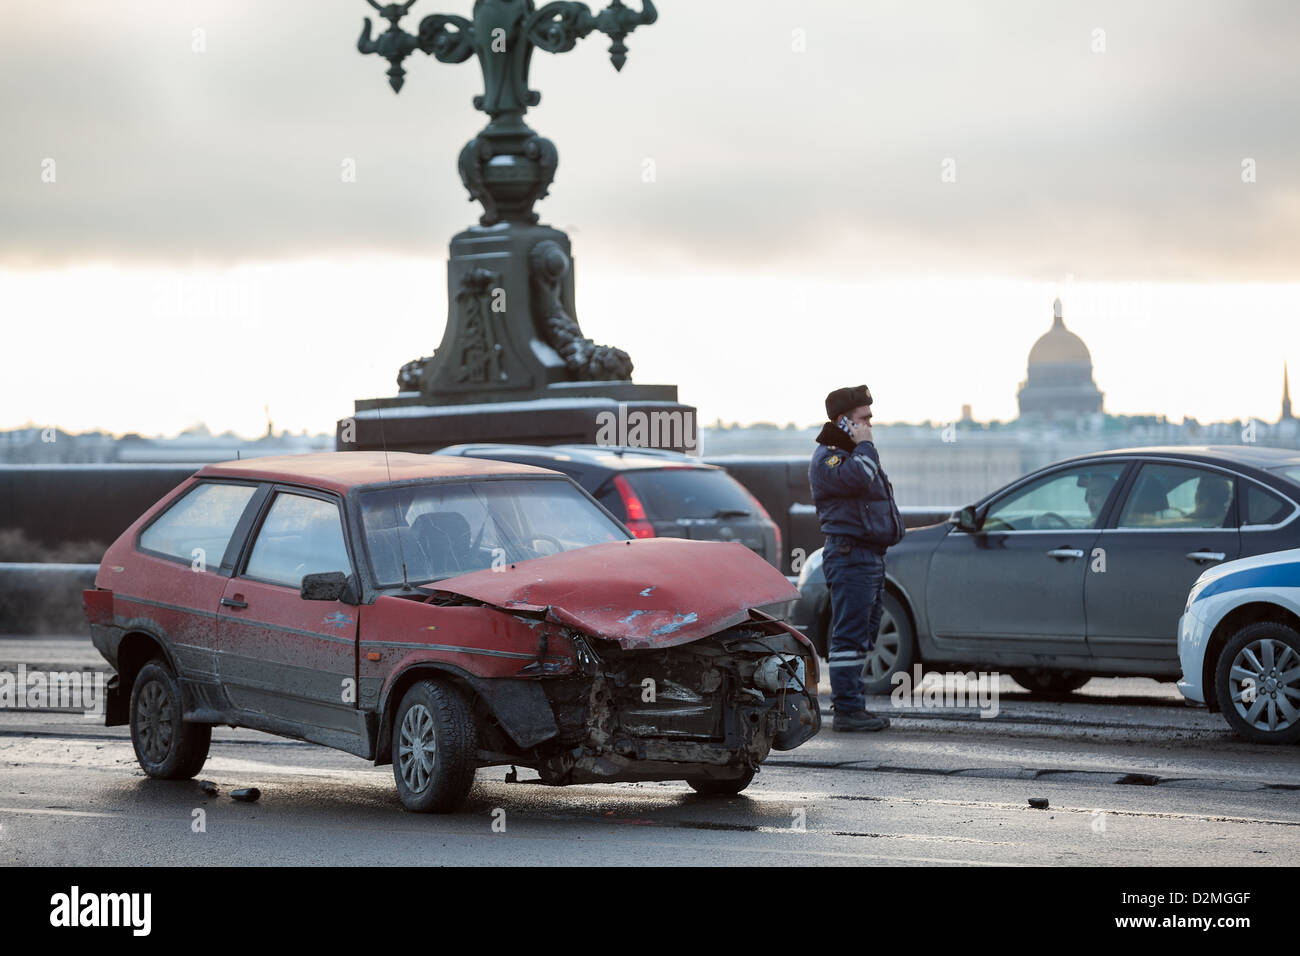 Crashed car after frontal impact is on city street with police in Saint-Petersburg, Russia. Driving oncoming traffic lane. Stock Photo